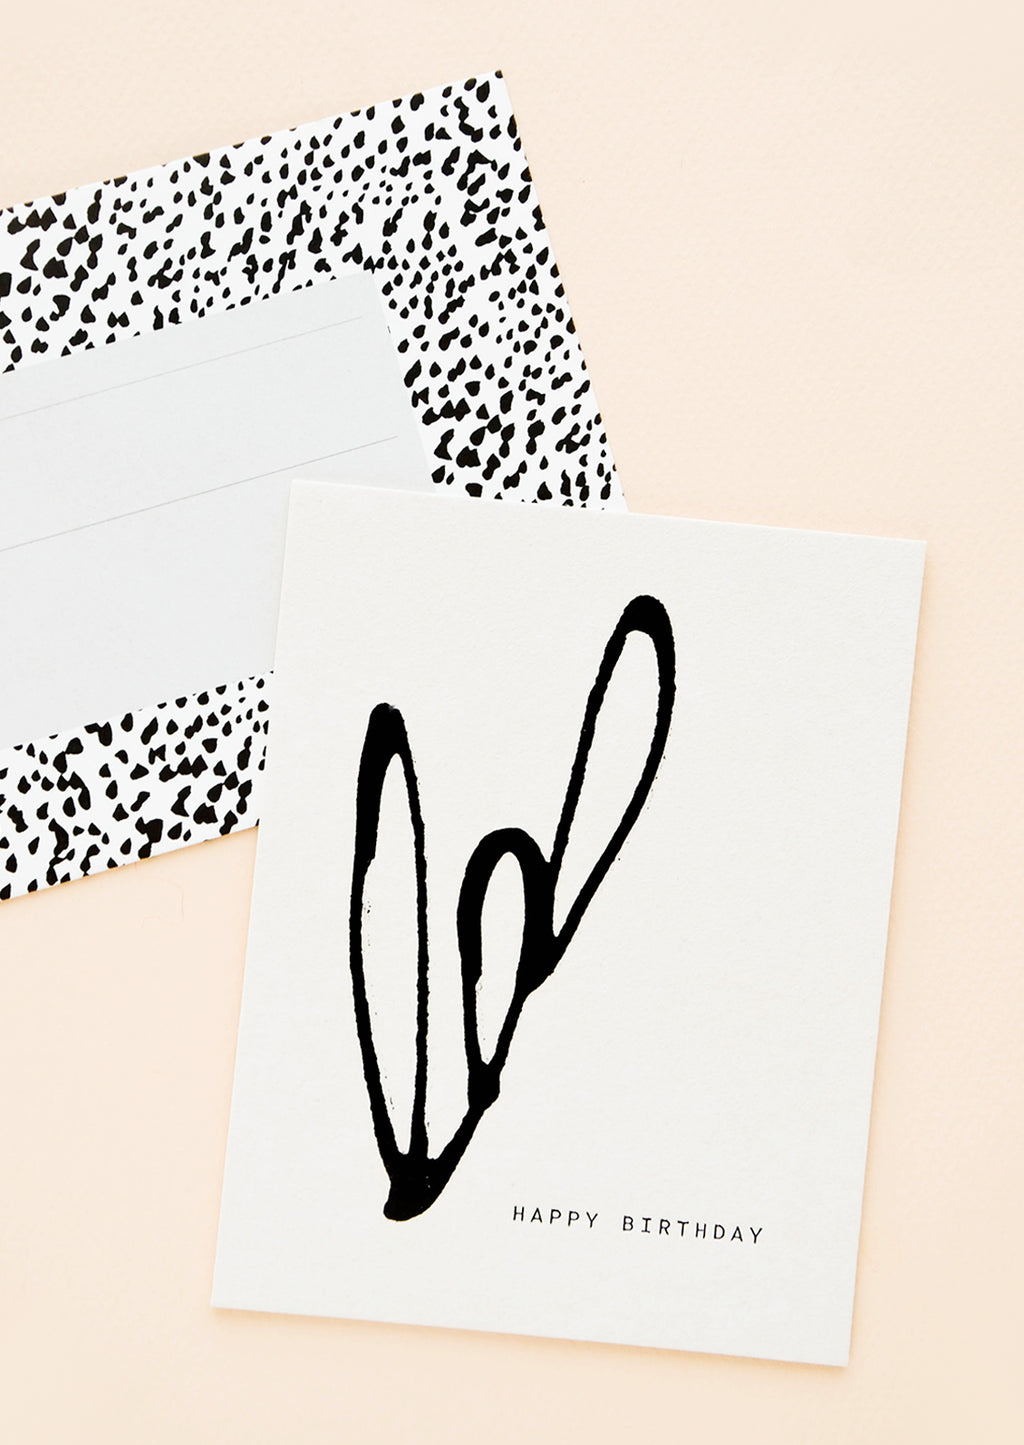 2: A black and white dotted envelope and white greeting card reading "happy birthday" with a simple organic design in black paint.